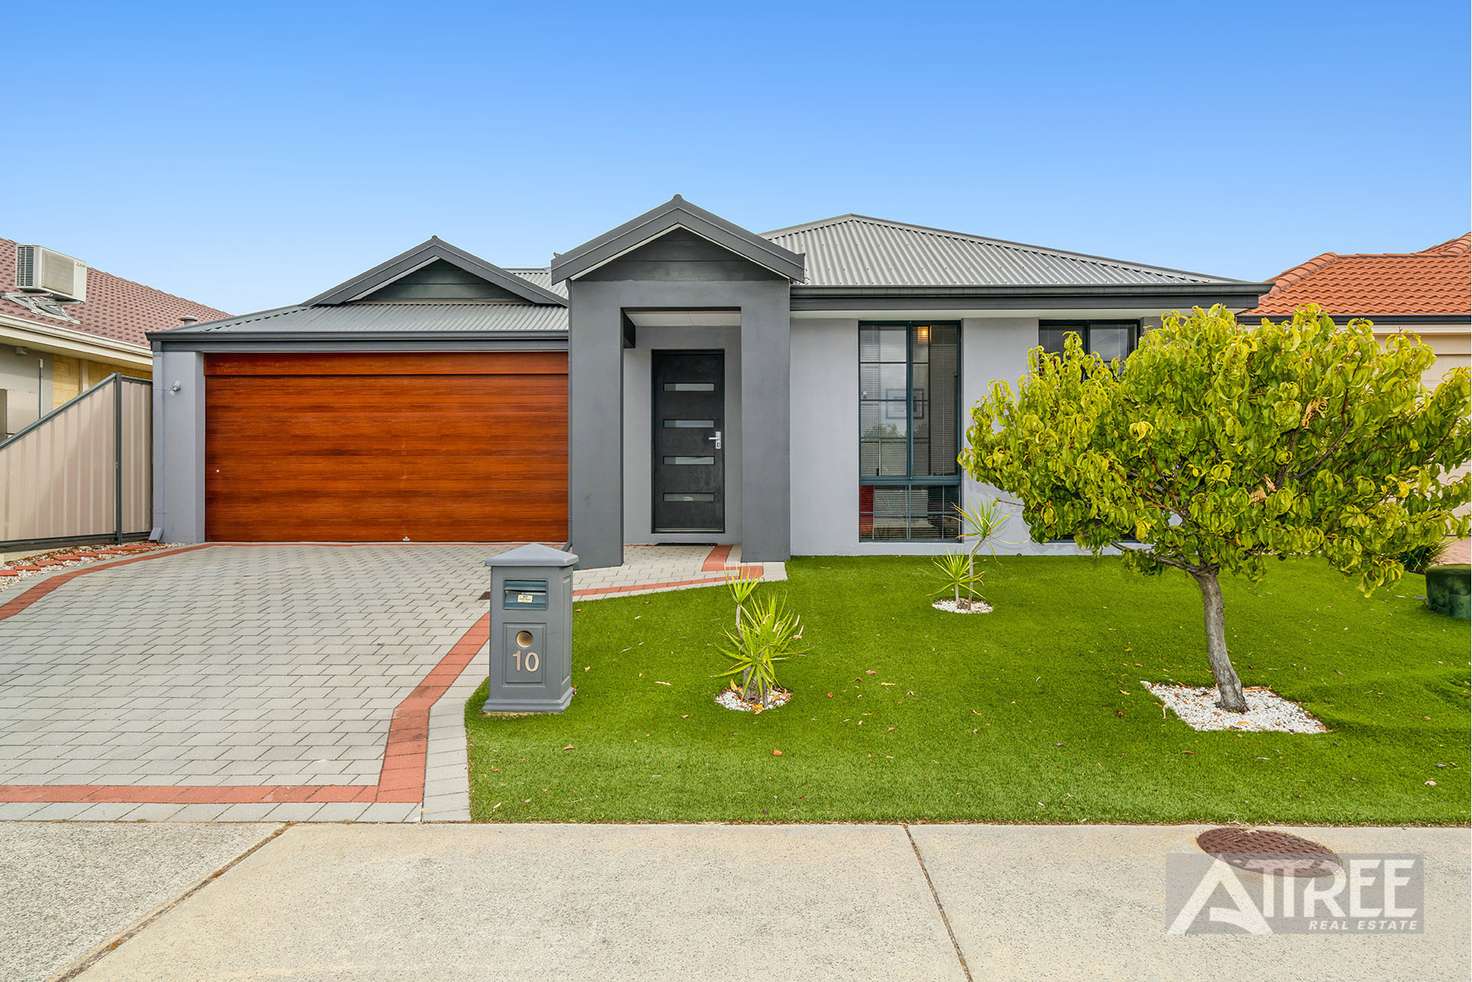 Main view of Homely house listing, 10 Warrilow Loop, Canning Vale WA 6155